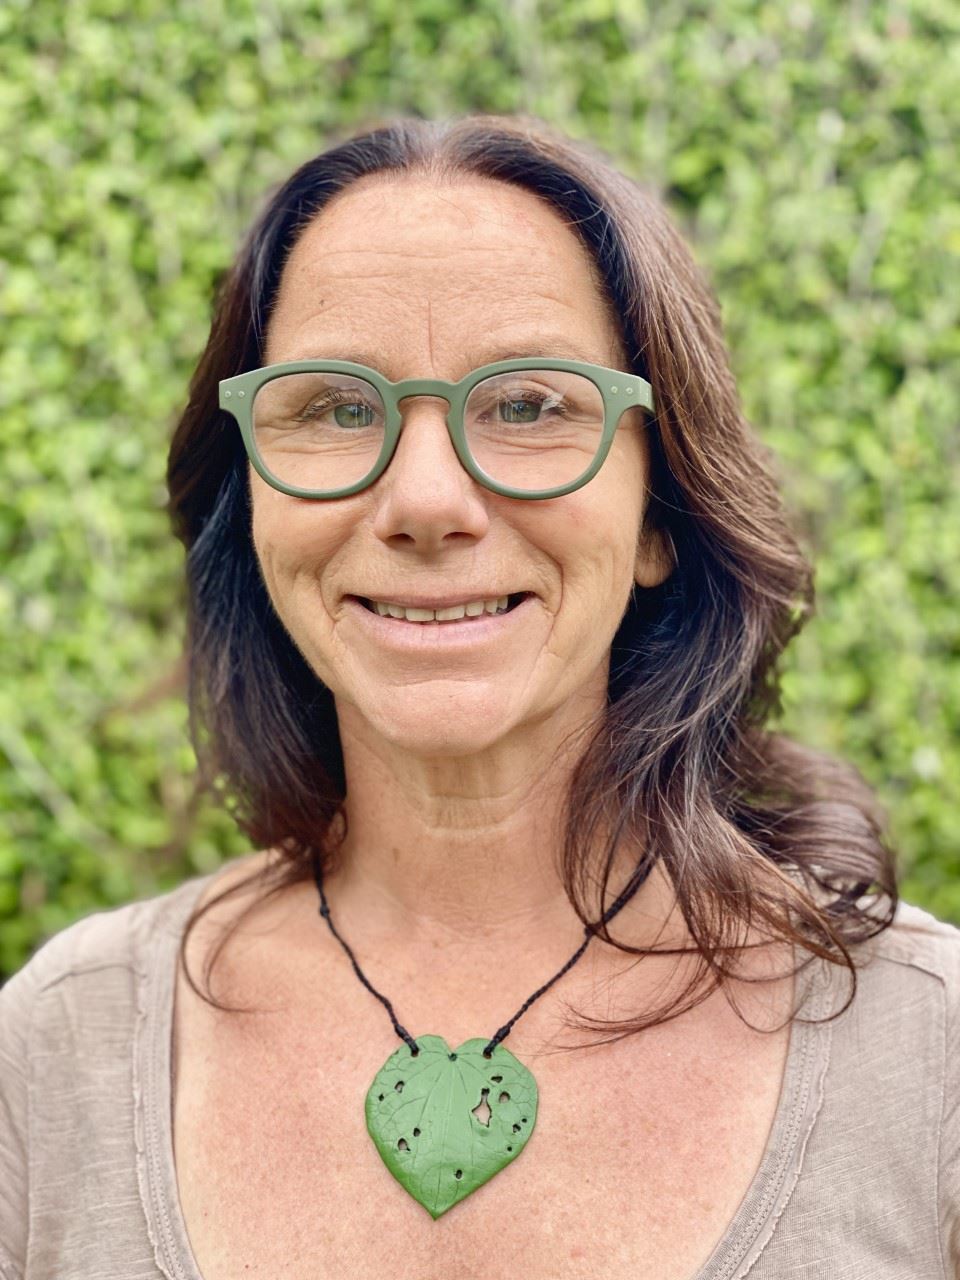 Presenter Sam wearing green glasses and green necklace in front of greenery background